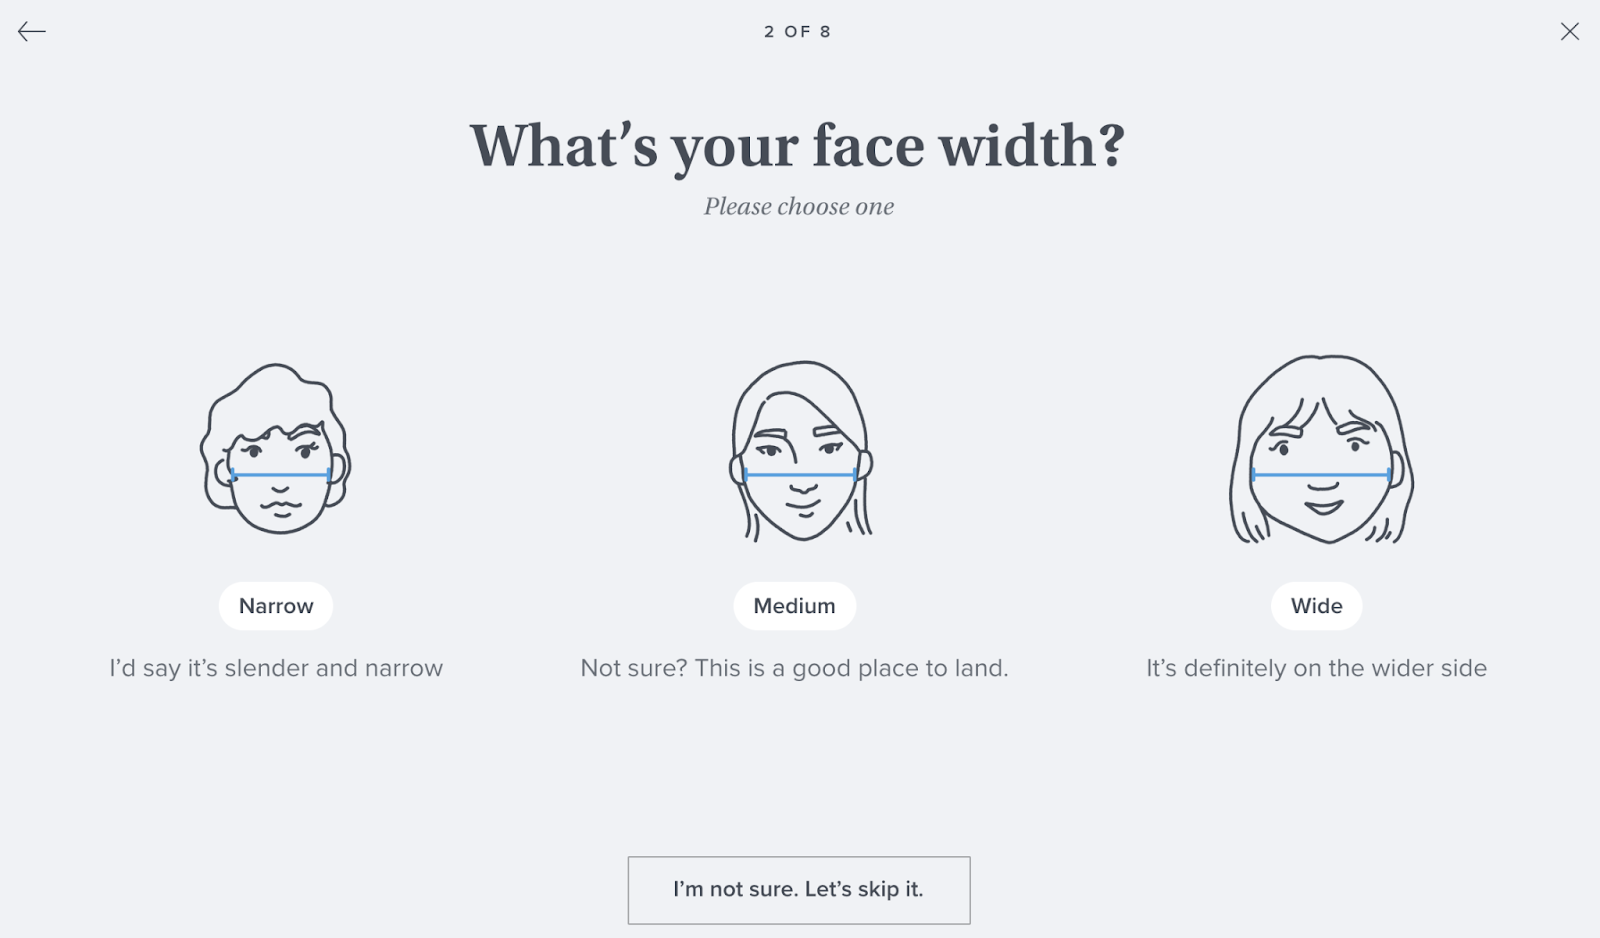 Warby Parker asking question to understand the face shape